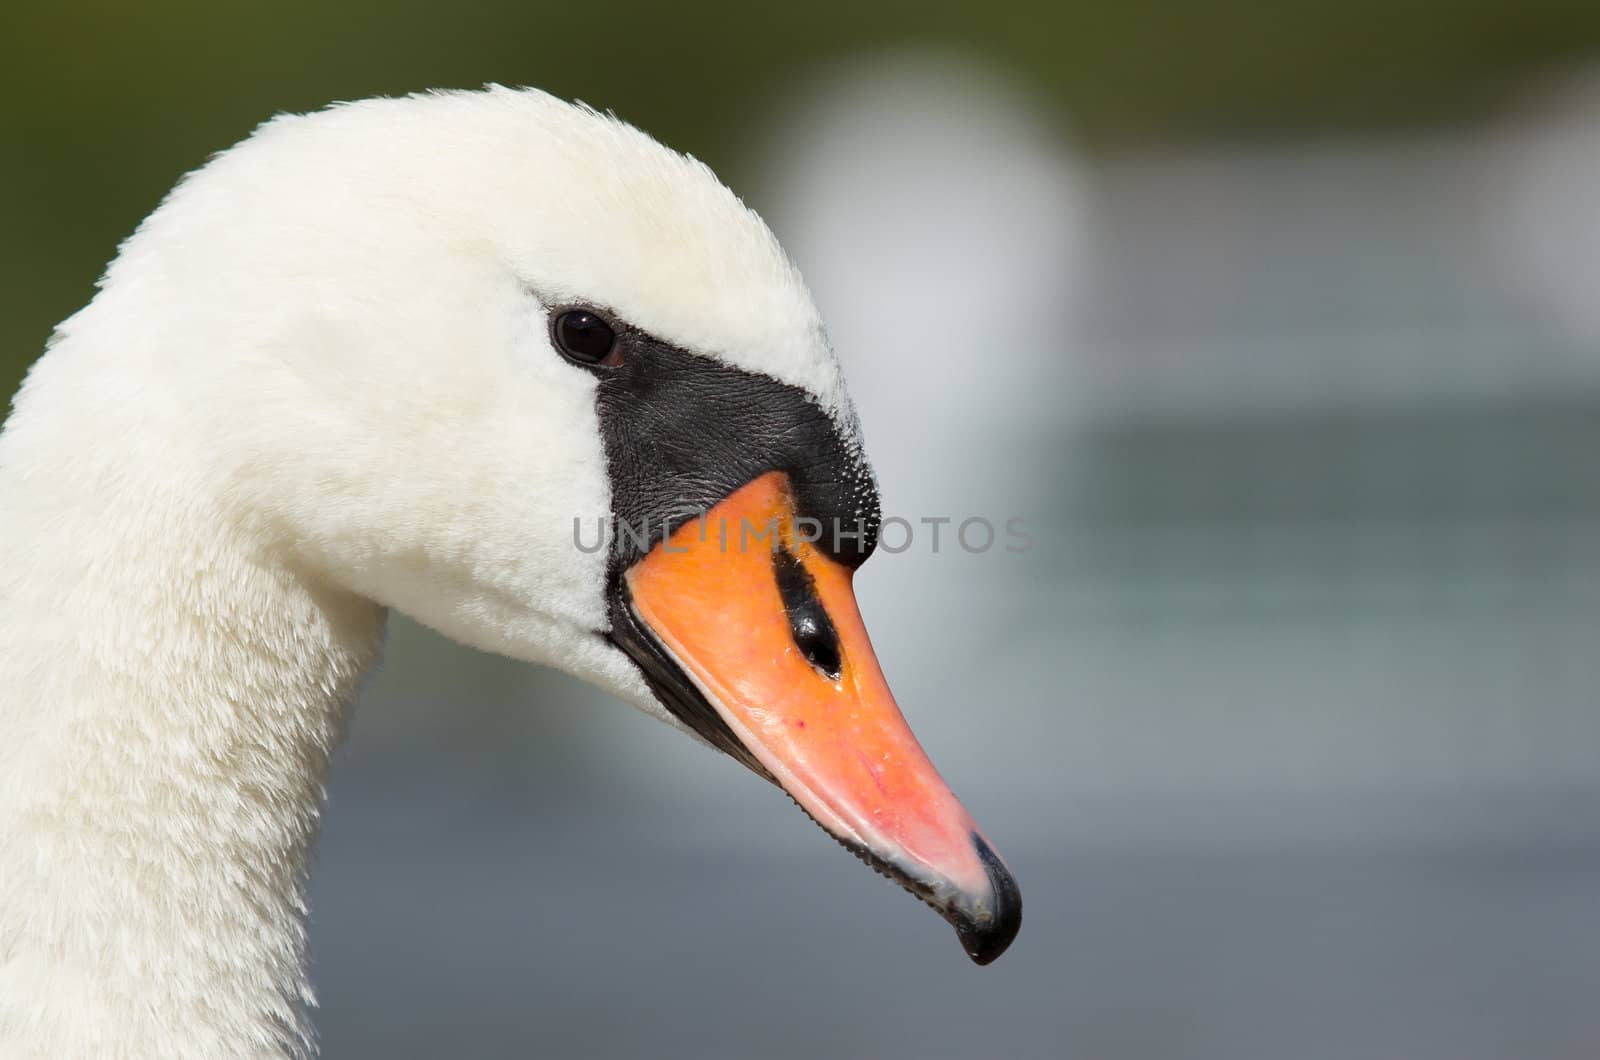 A closeup of a swan by michaklootwijk